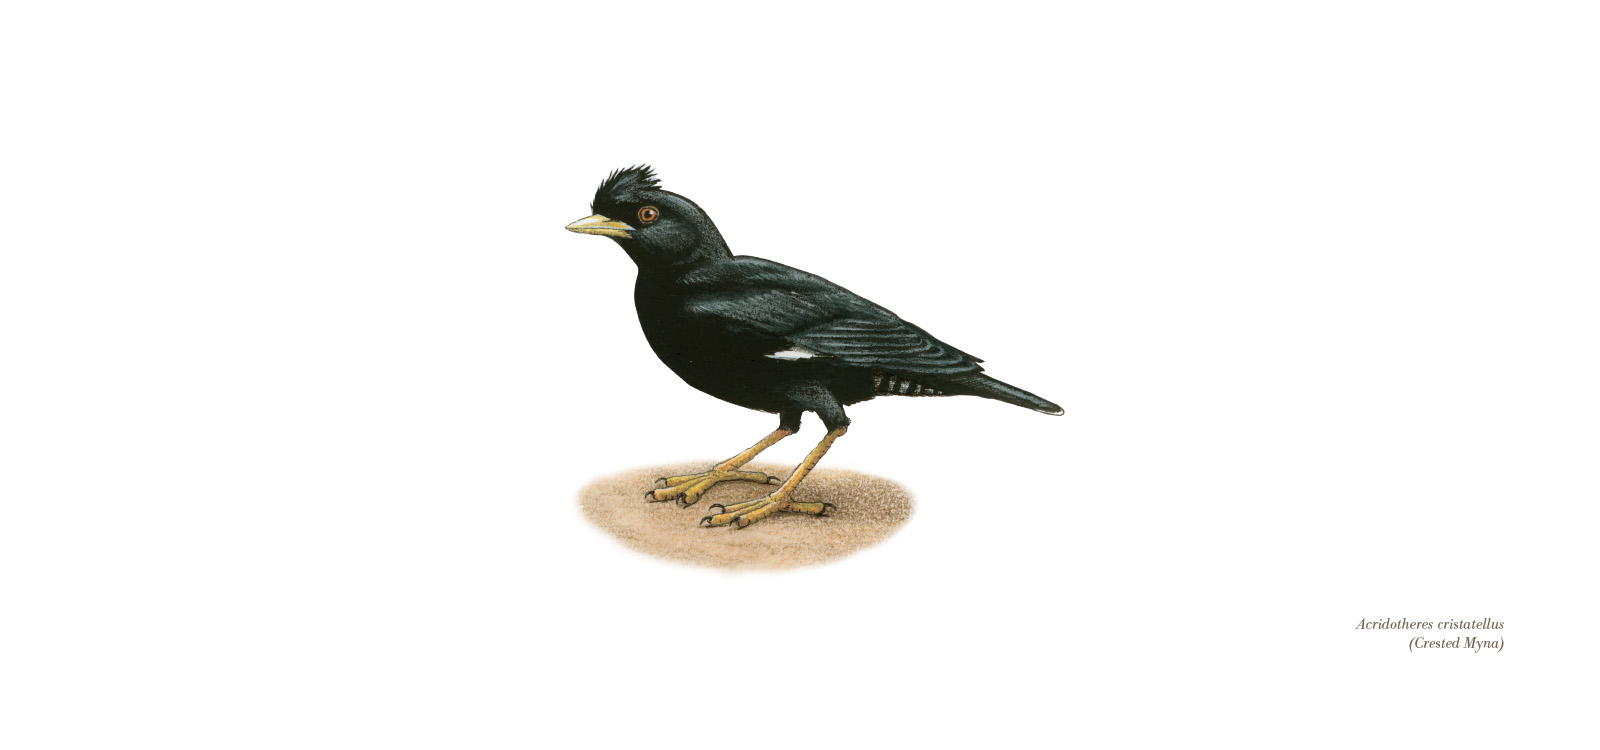 Crested Myna by Lionel Portier